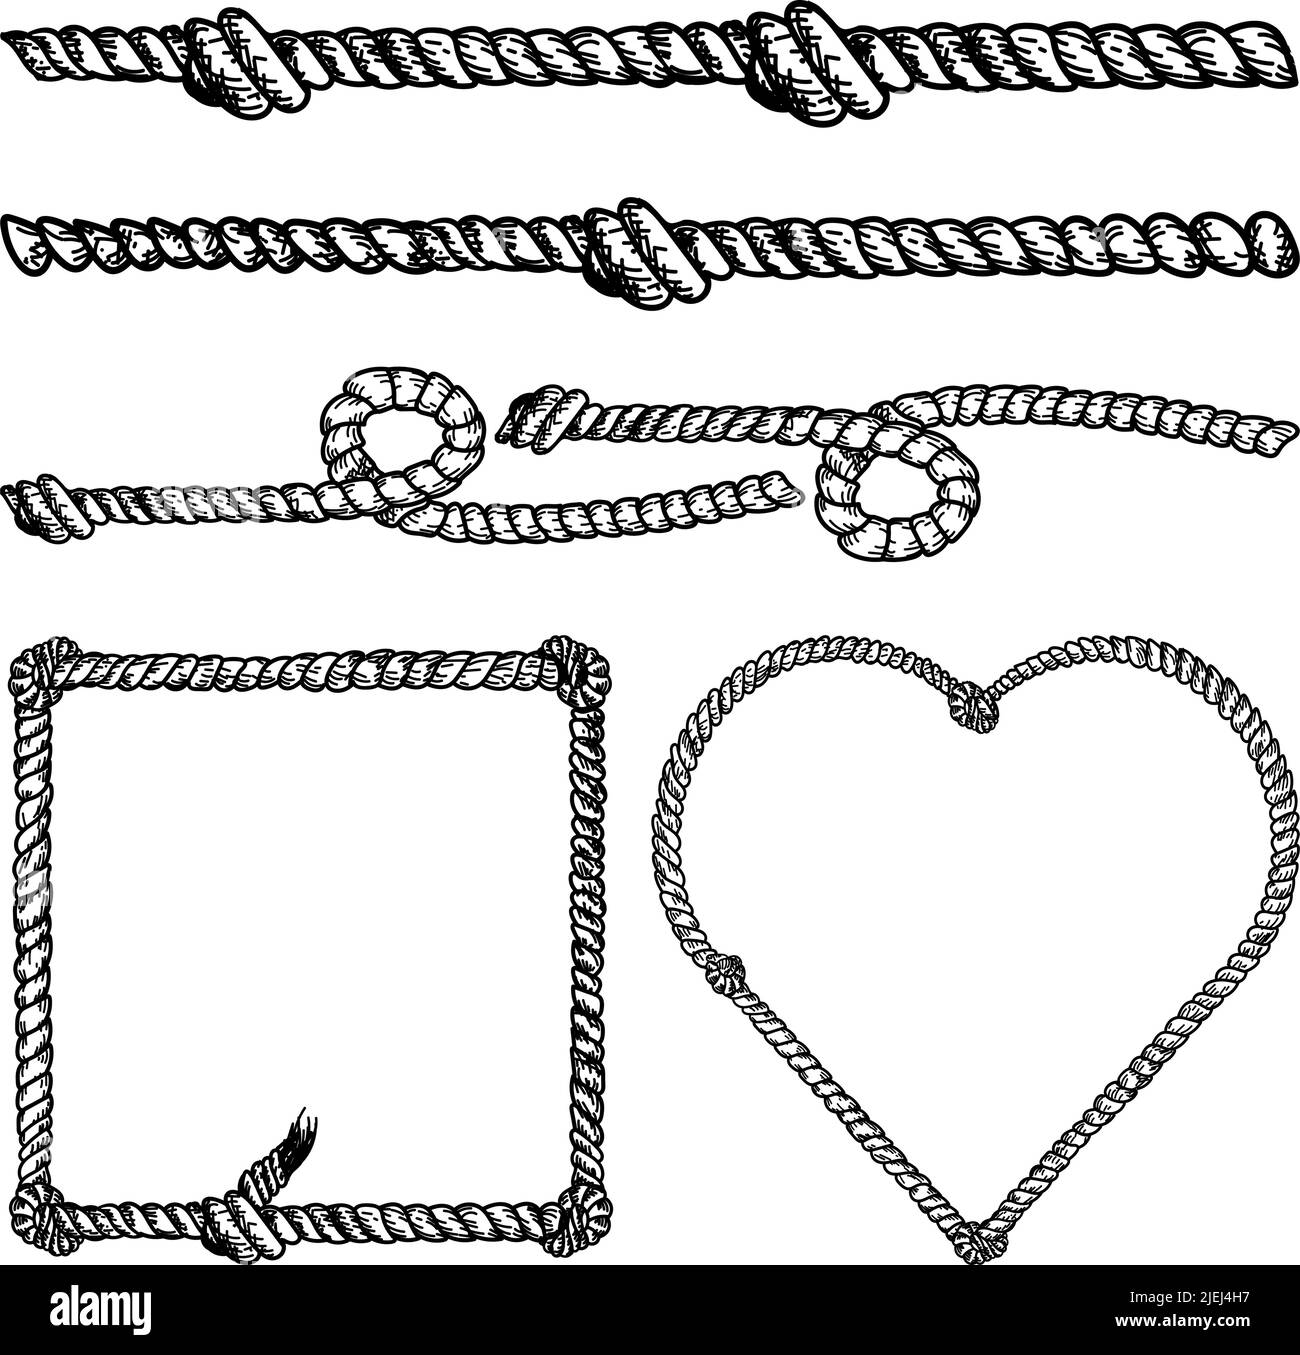 Nautical rope vector dividers and elements, hand-drawn doodle in